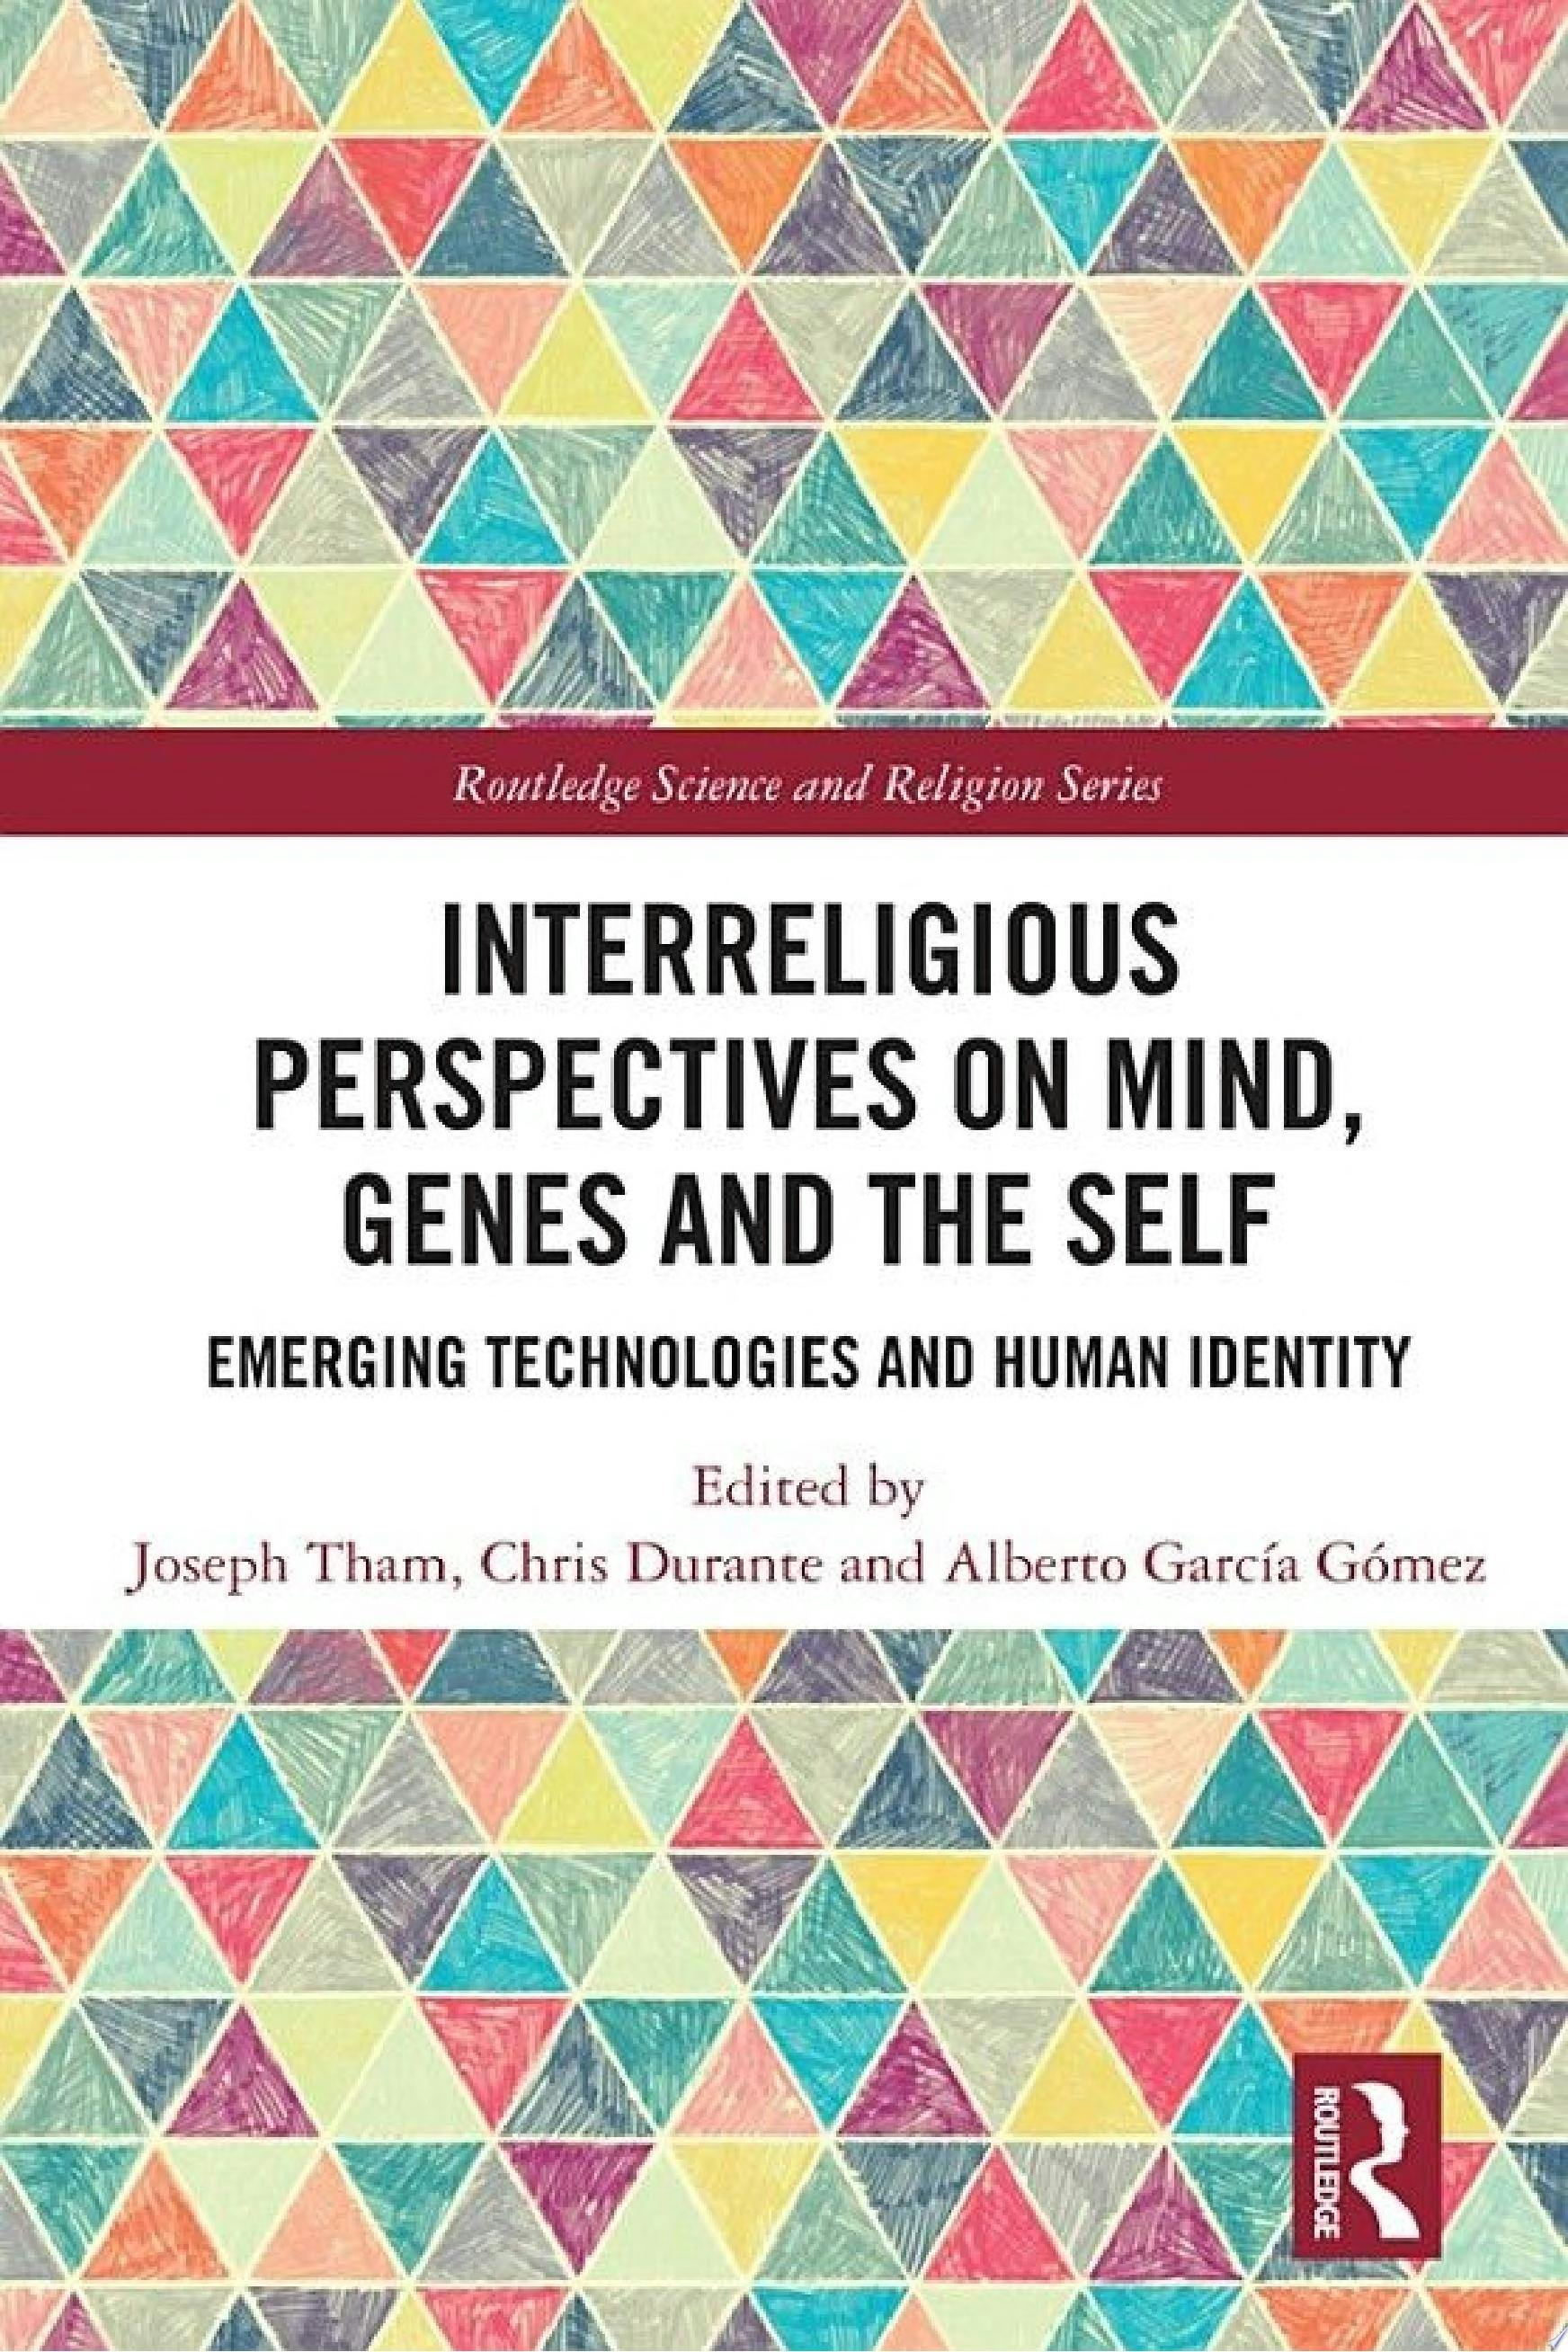 Interreligious Perspectives on Mind, Genes and the Self: Emerging Technologies and Human Identity.